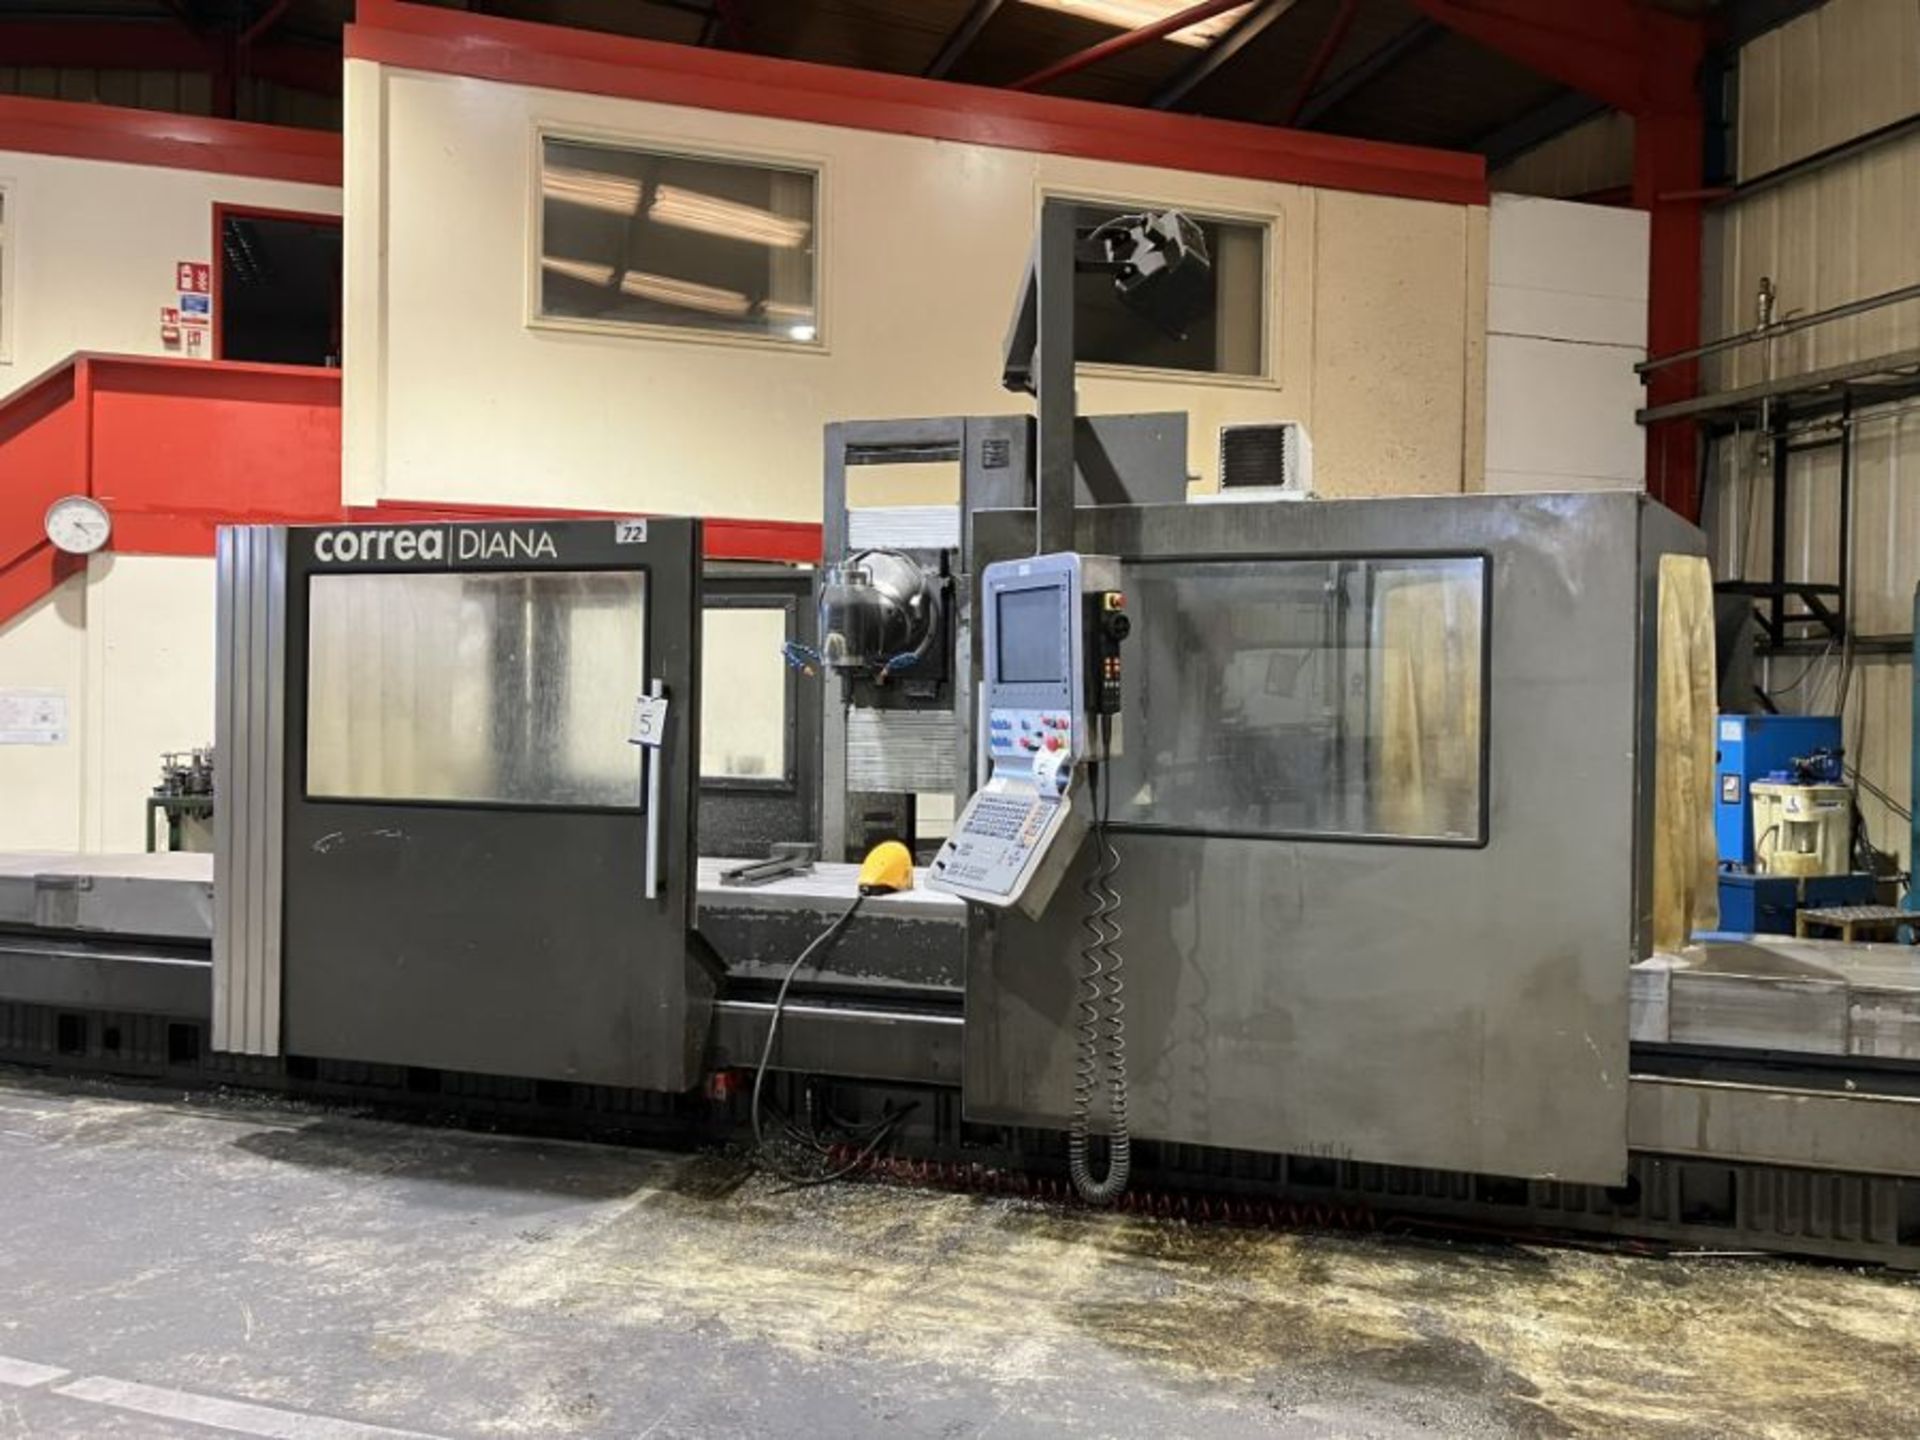 Correa model Diana 35 CNC bed mill, 5 axis (3 plus 2) (2007) - Image 3 of 17